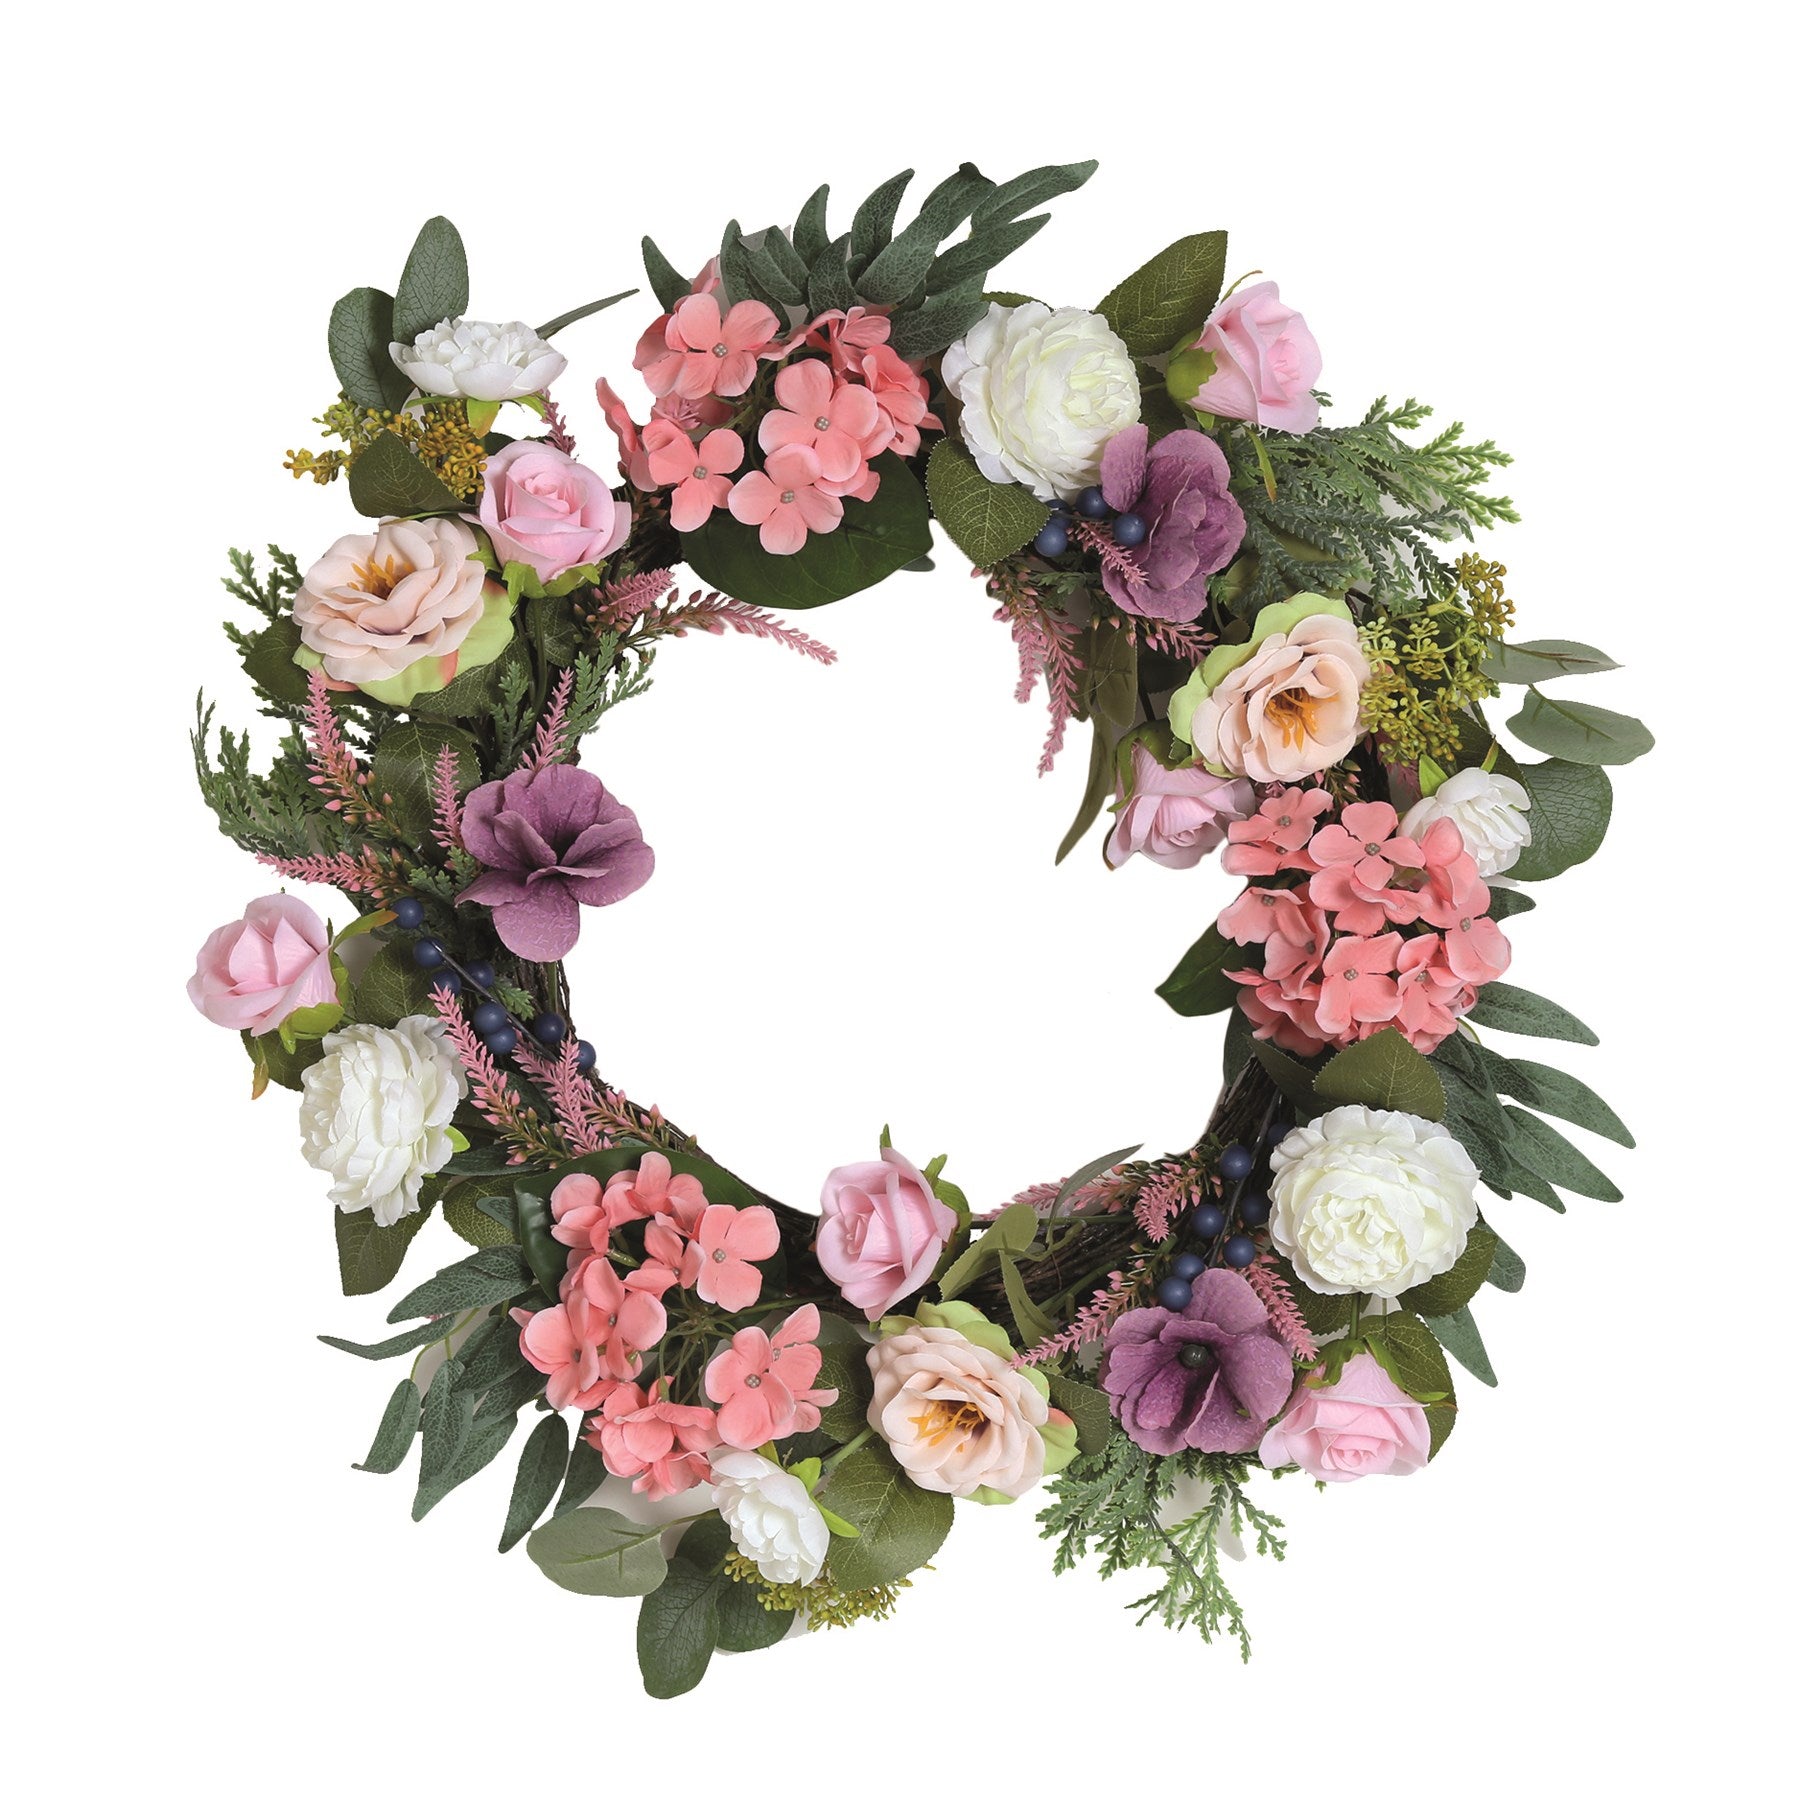 Mixed Floral Wreath Pink Peony, Hydrangea and Rose | More Than Just A Gift